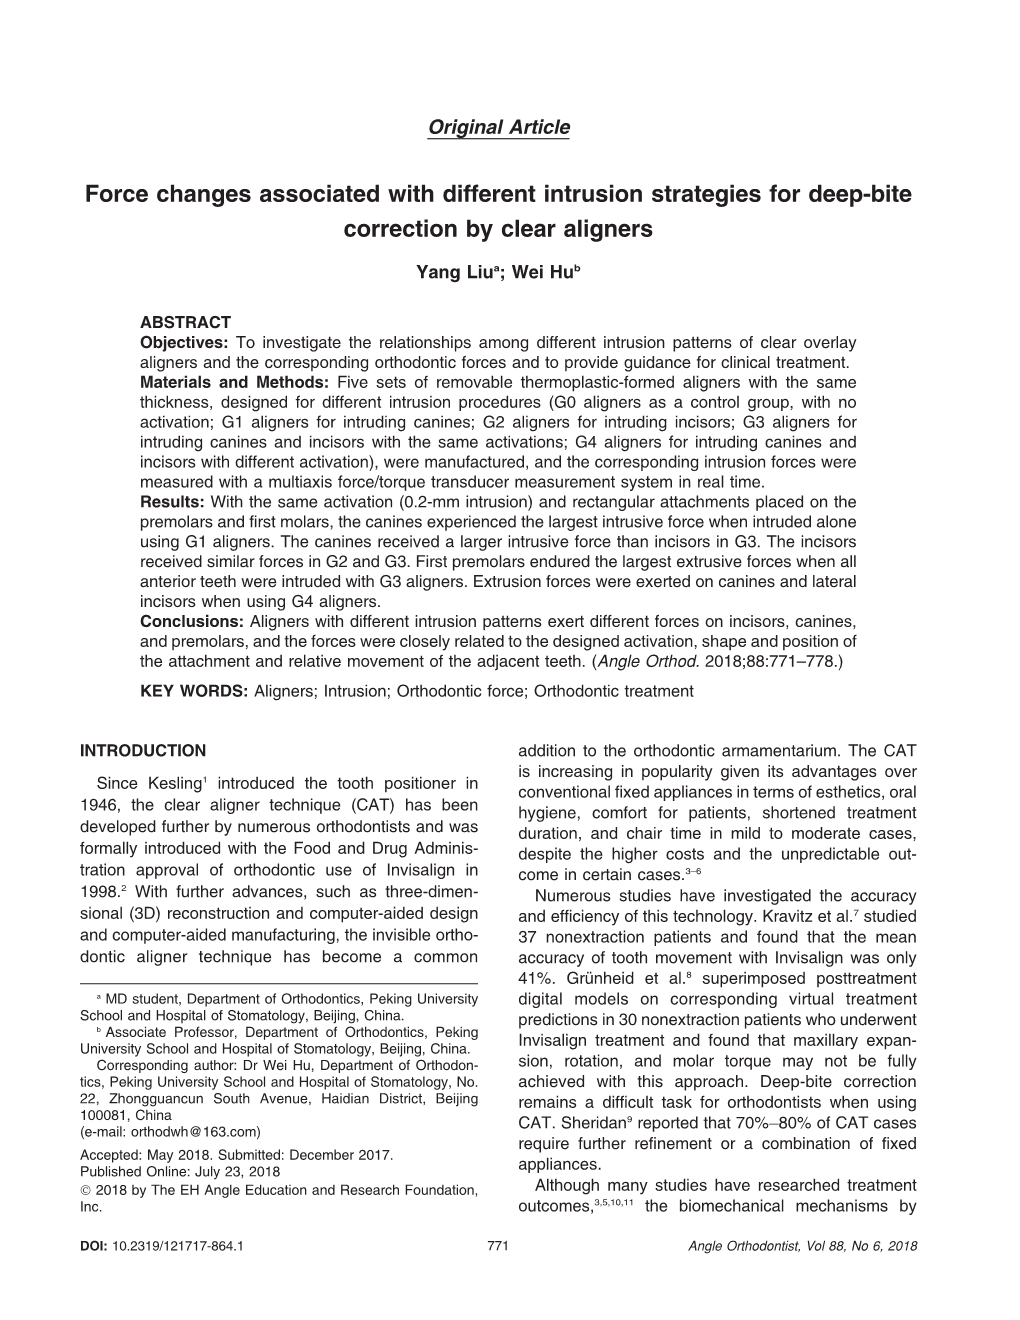 Force Changes Associated with Different Intrusion Strategies for Deep-Bite Correction by Clear Aligners